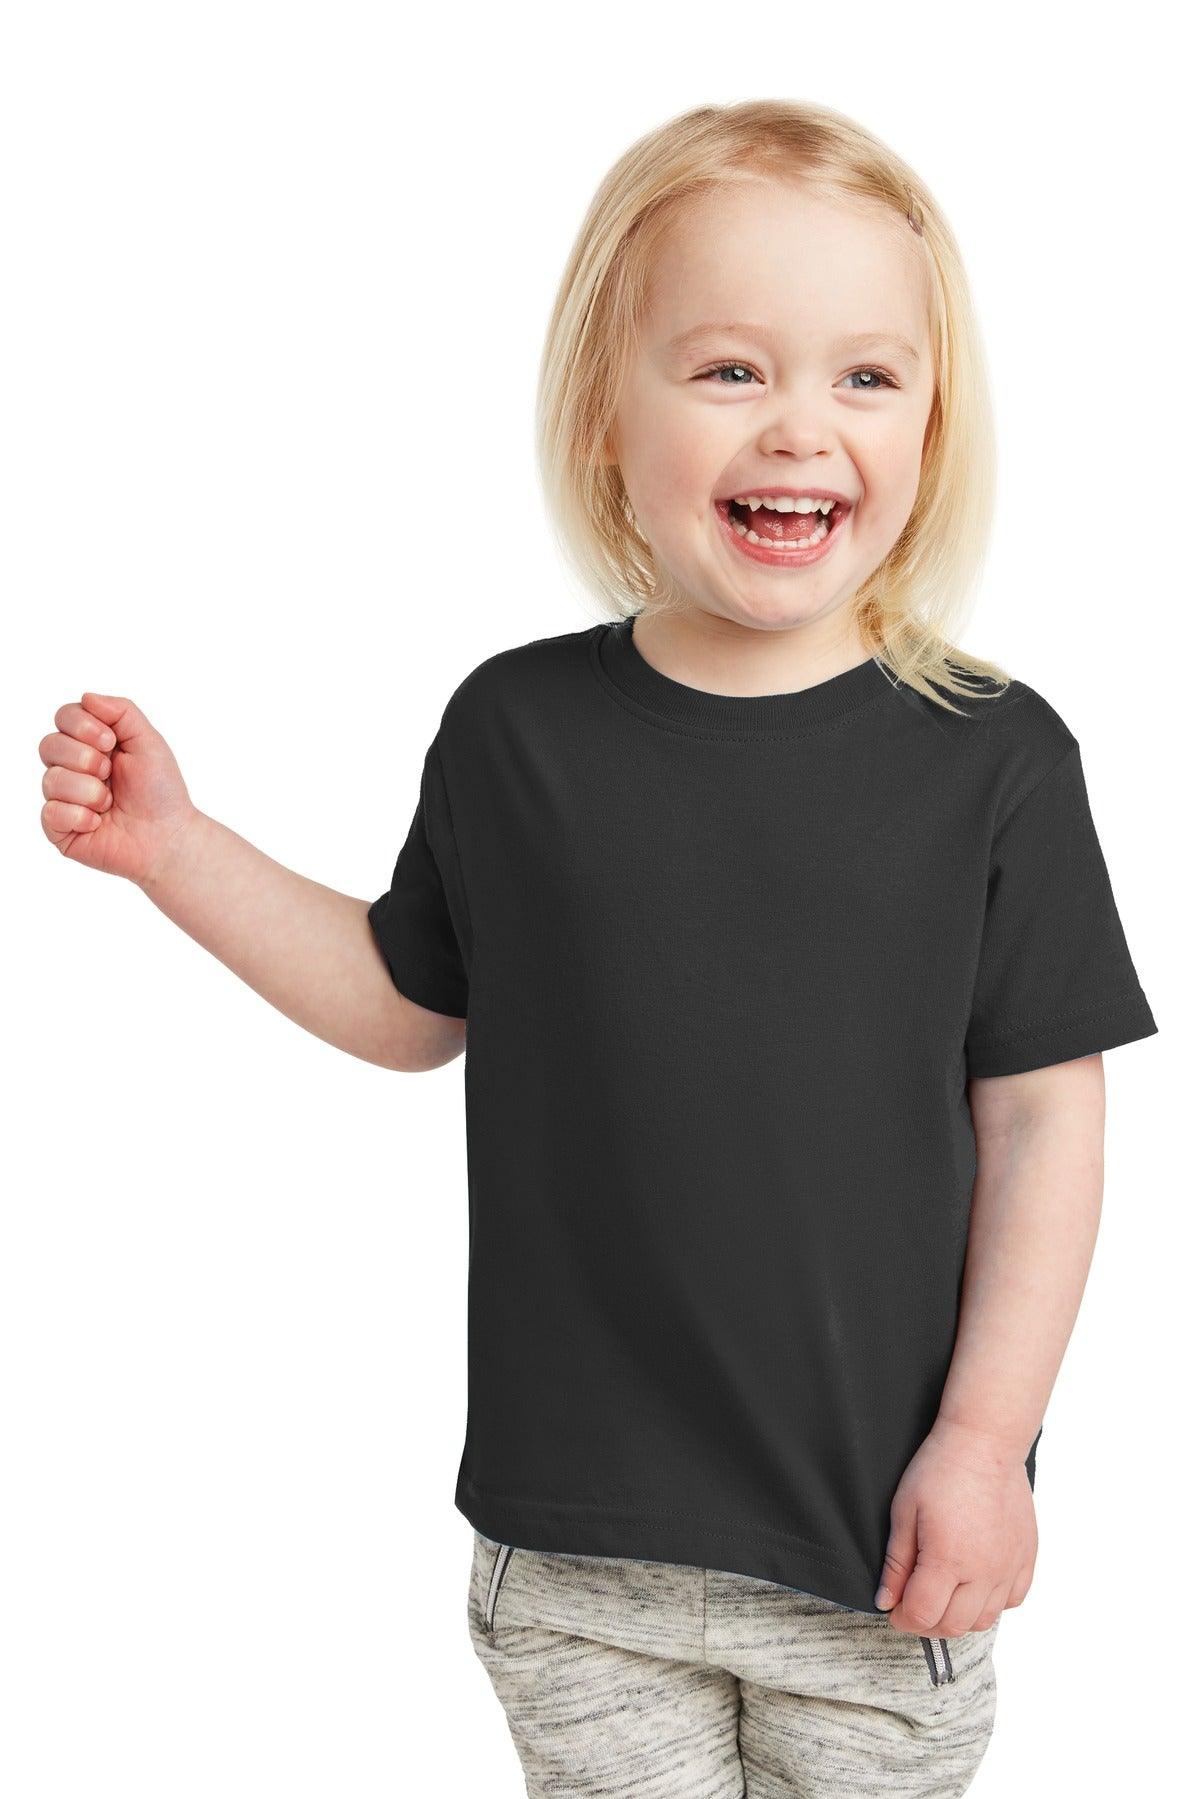 Rabbit Skins Toddler Fine Jersey Tee. RS3321 - Dresses Max